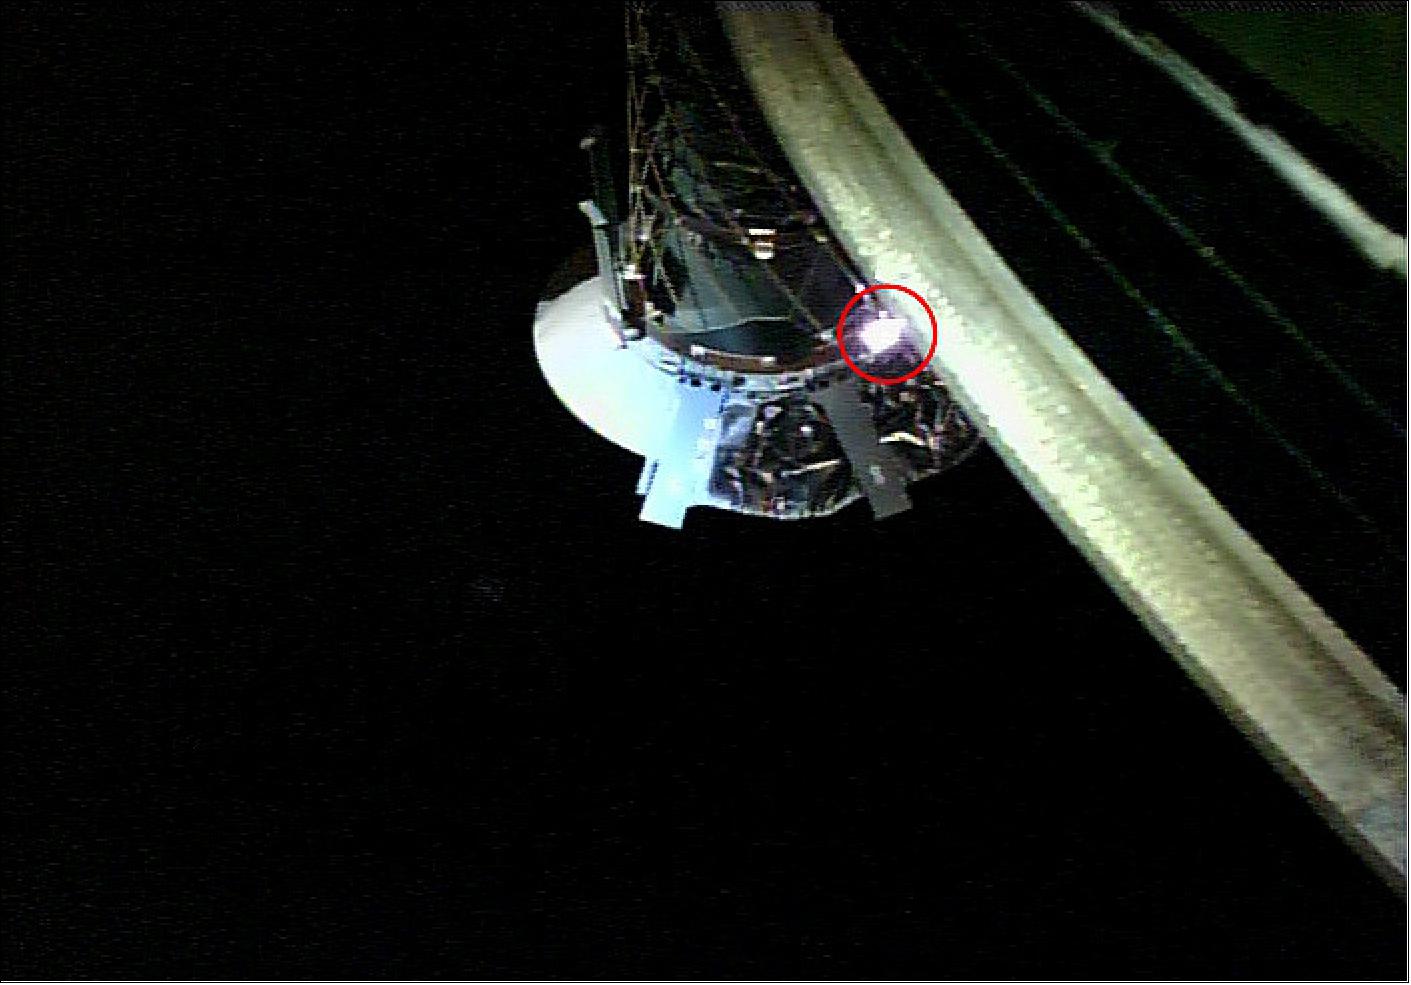 Figure 78: Test photograph of the sampler horn taken by the Small Monitor Camera (CAM-H) on April 16, 2018. The shiny part in the red circle is the target plate of the sampler horn which is integrated with the LRF-S2 laser. If the laser misses this plate, touchdown is in process and bullets will fire to stir up surface material (image credit: JAXA)